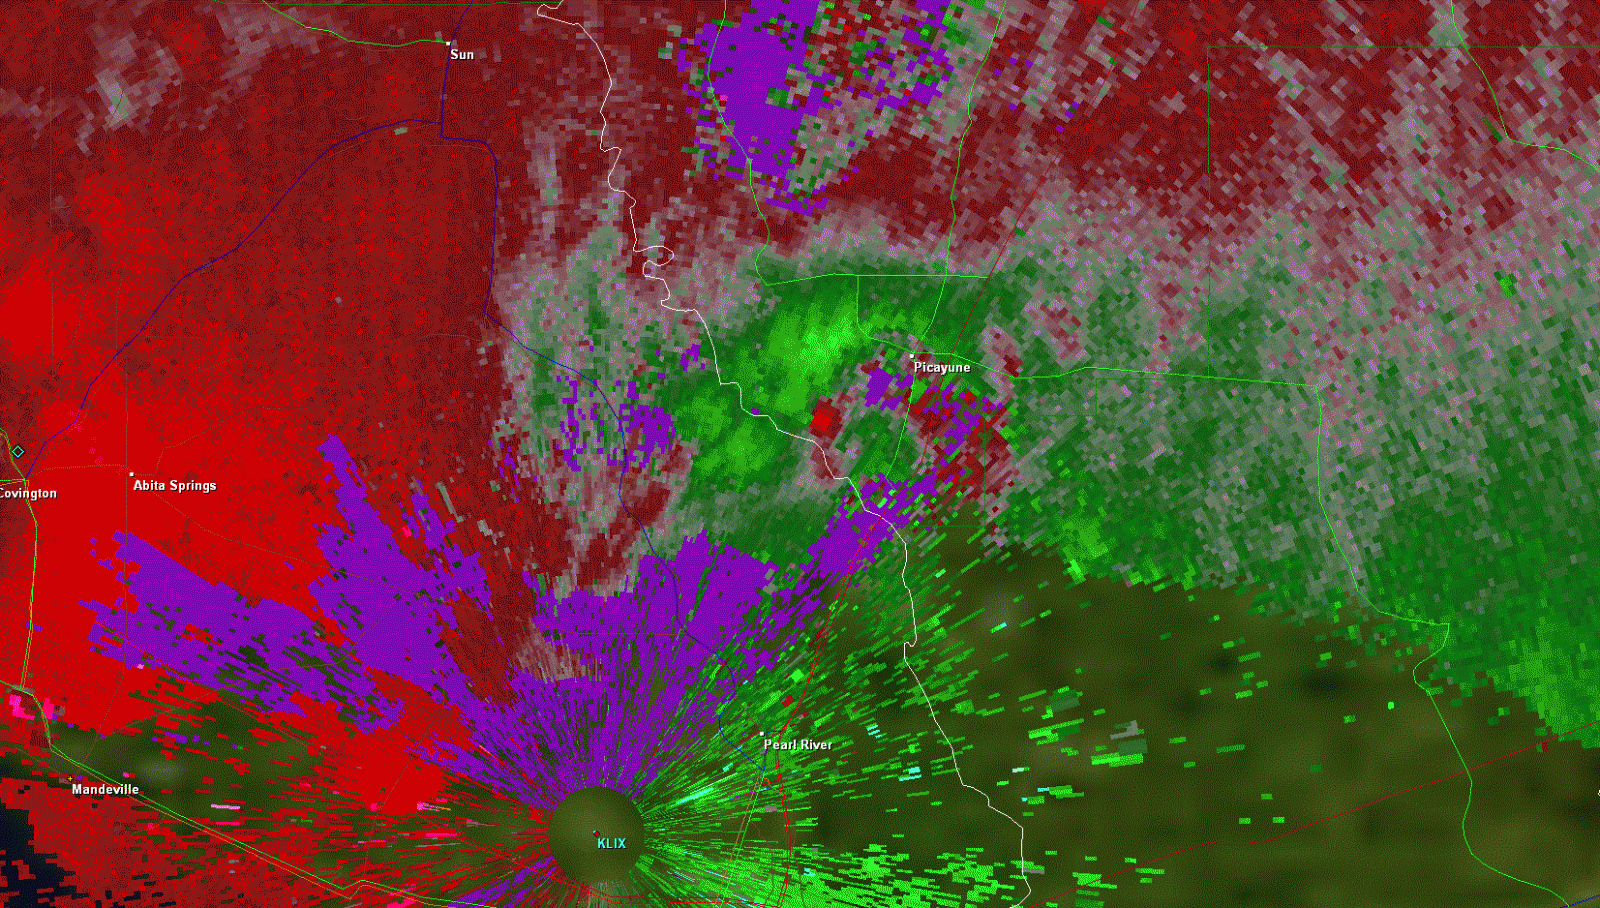 KLIX Storm Relative Velocity product for Picayune, MS tornado of 3/9/2011